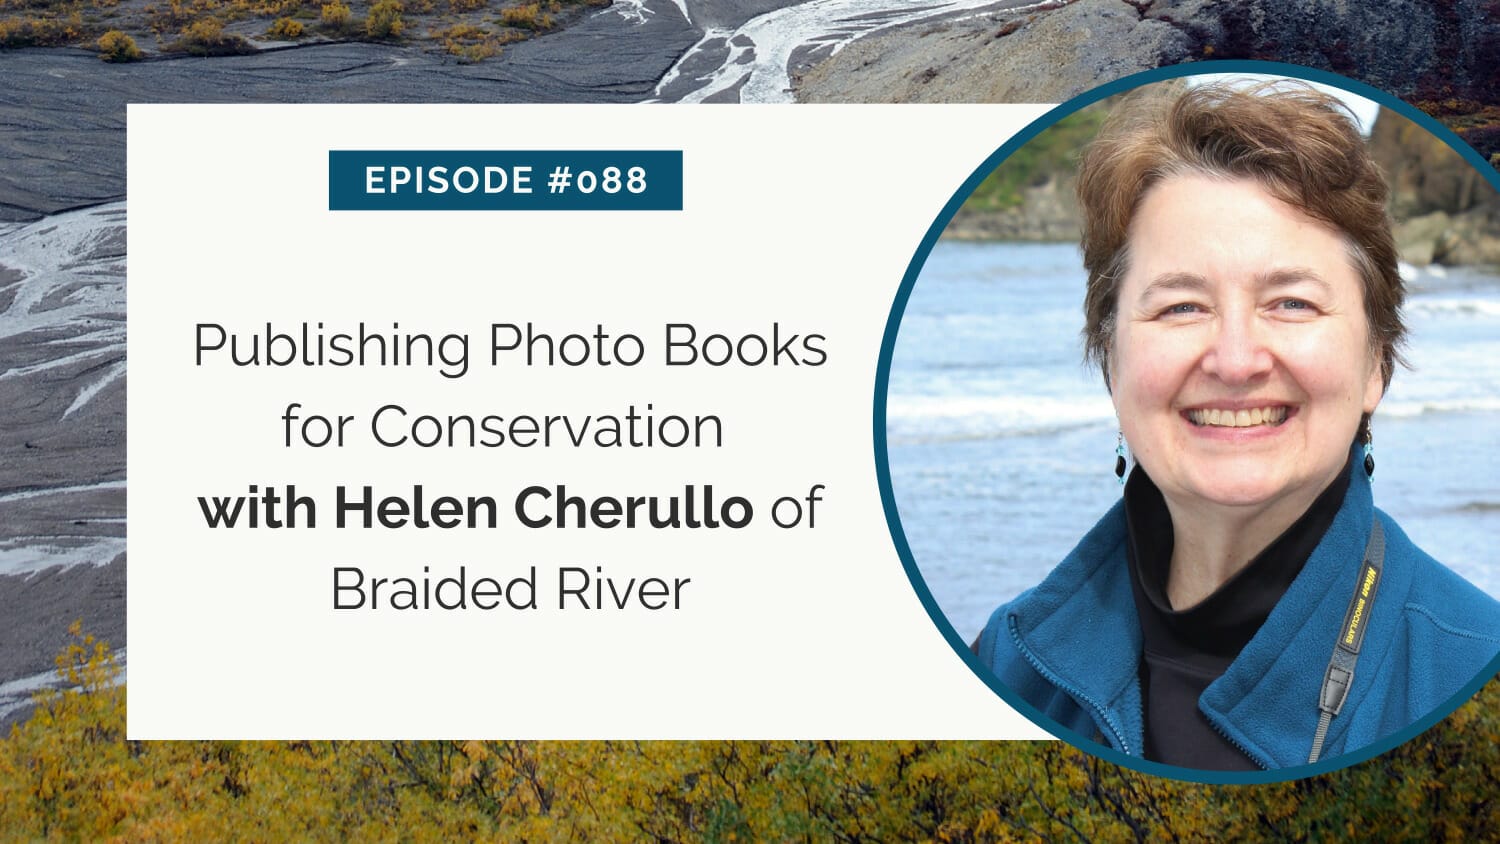 Woman discussing publishing photo books for conservation on a podcast episode.